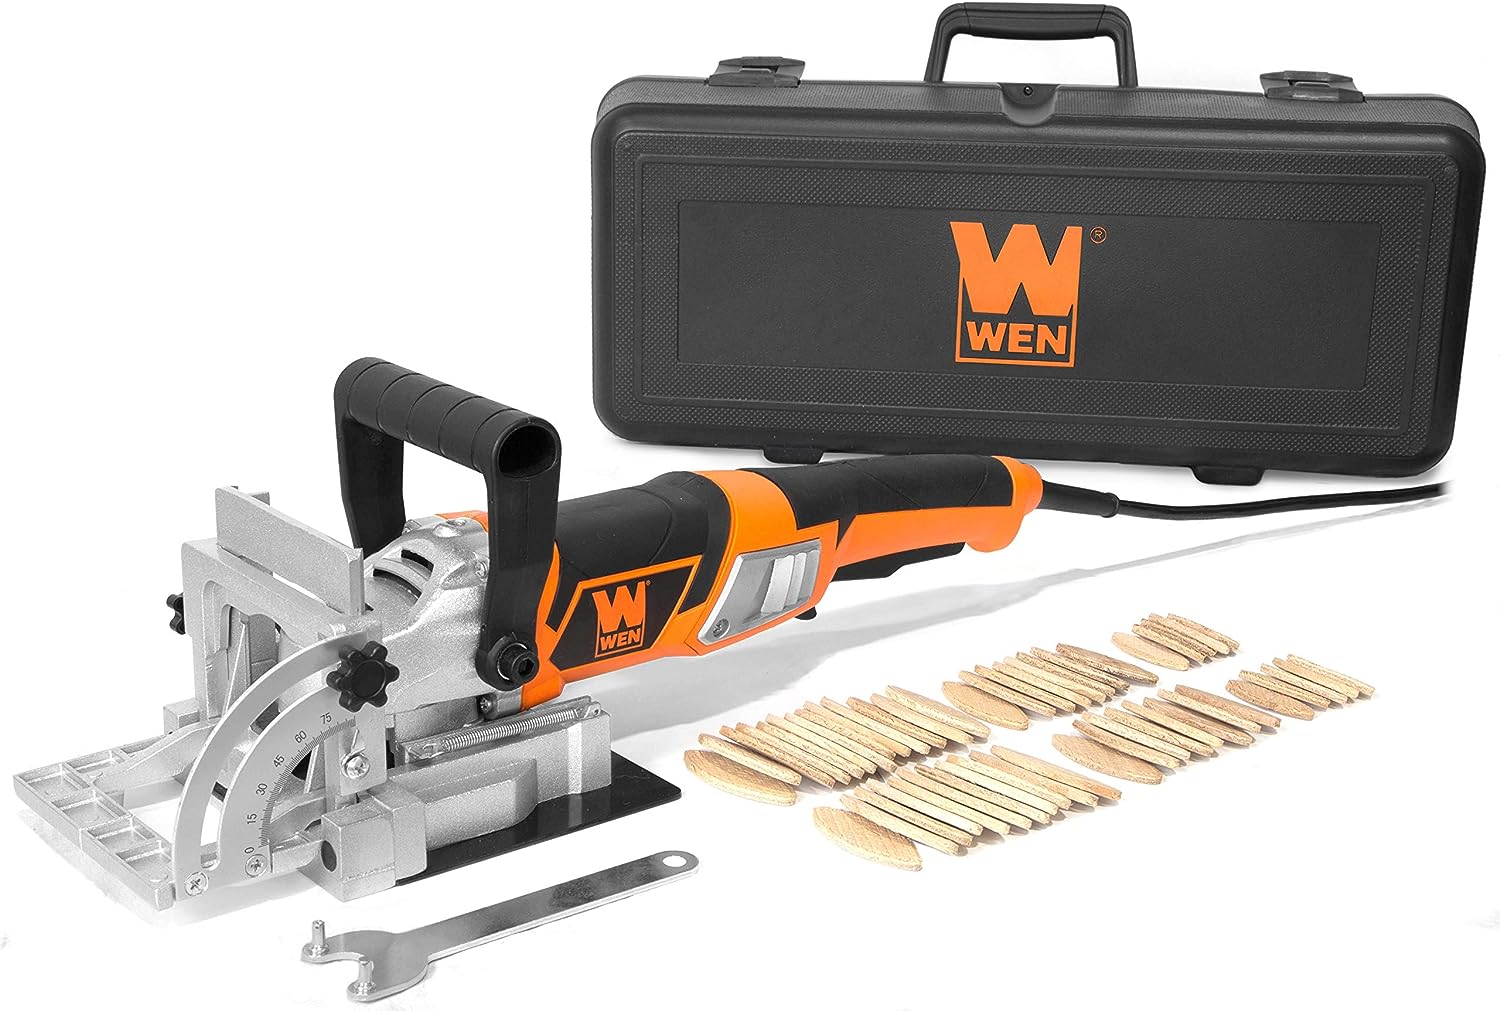 WEN JN8504 8.5-Amp Plate and Biscuit Joiner with Case [...]